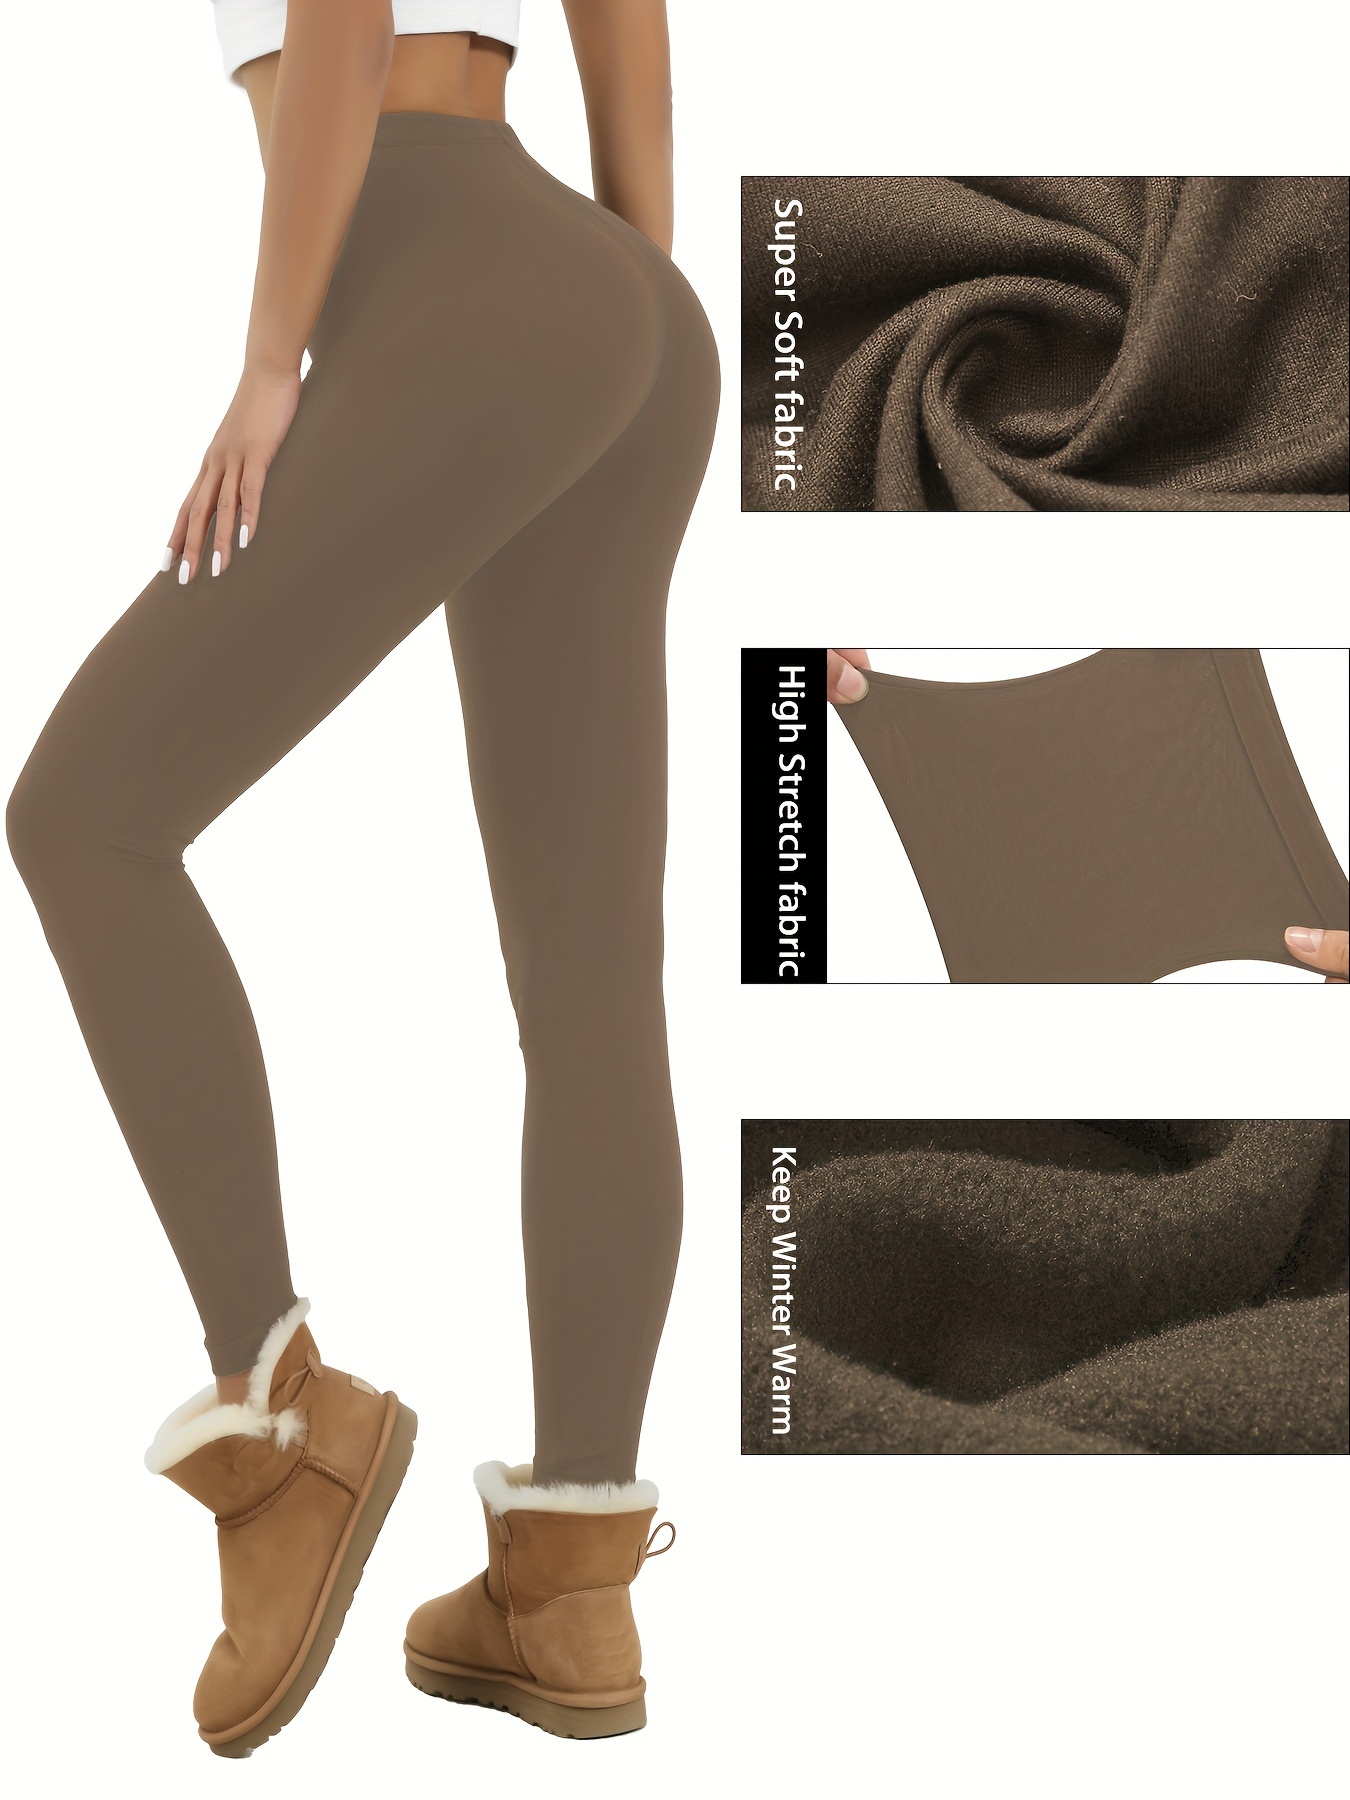 style and glamour Women's Fleece Lined Leggings#(Brown UK 8